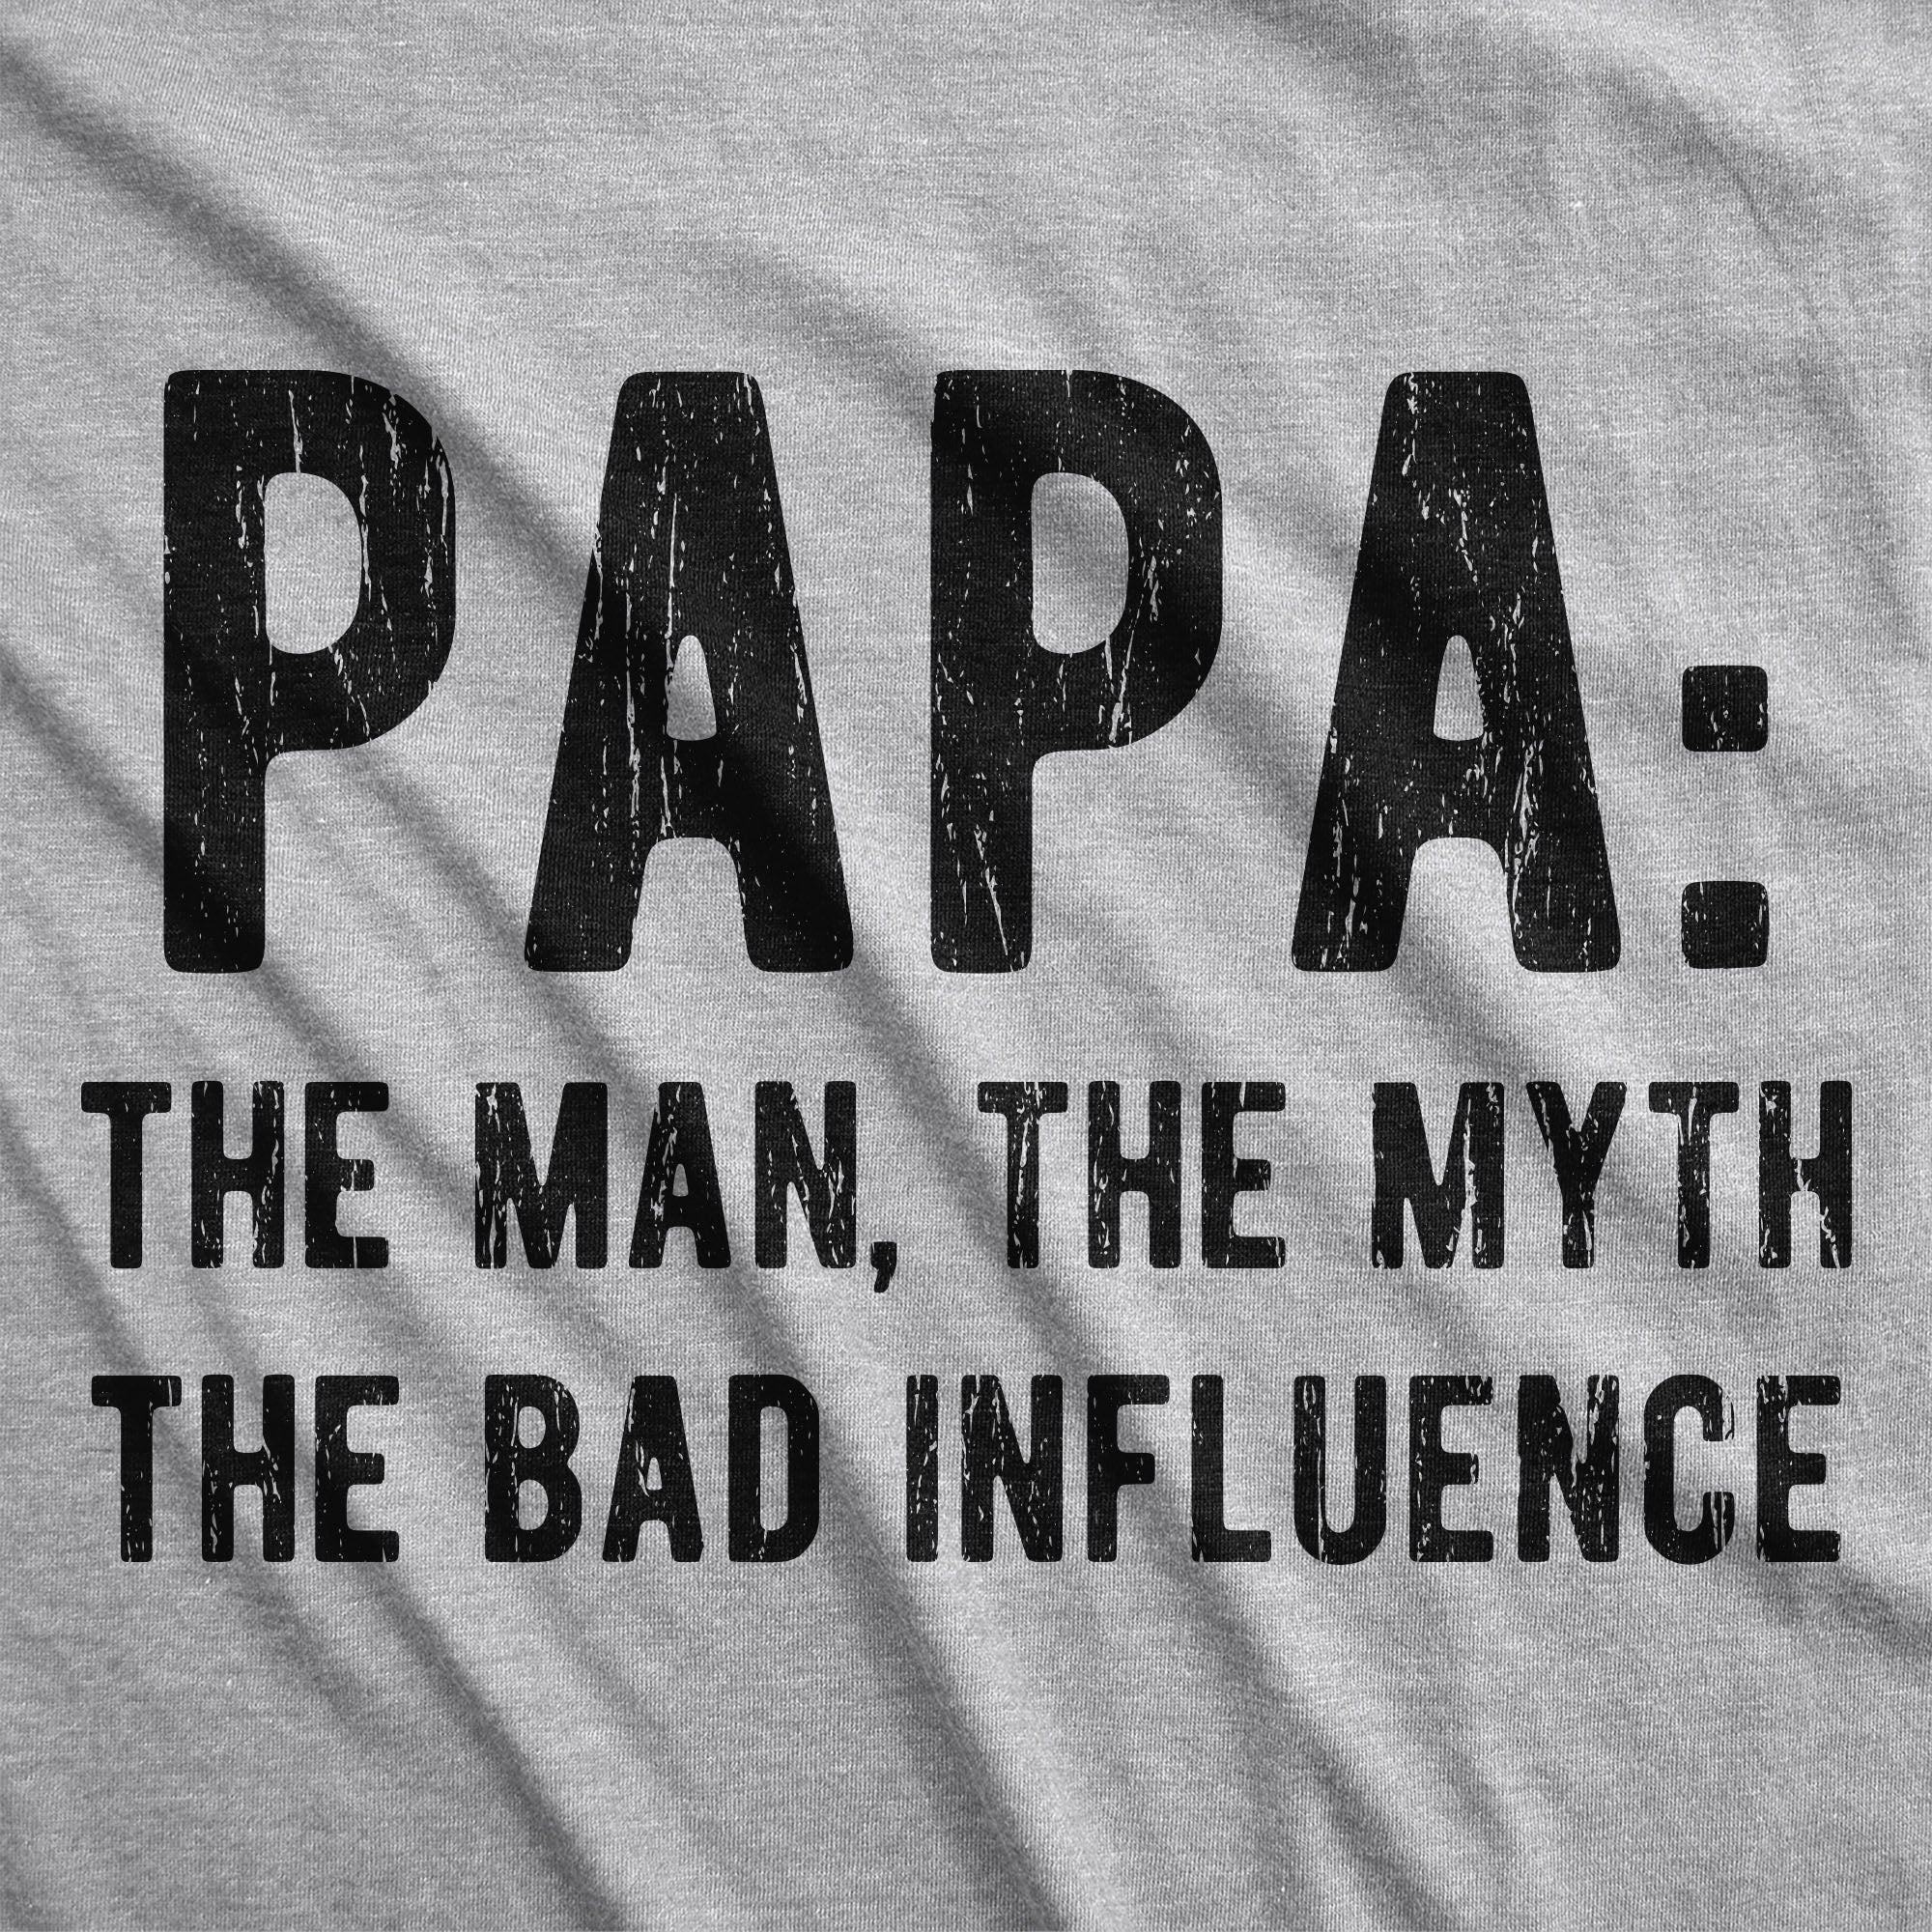 Funny Light Heather Grey - Papa Legend Papa The Man The Myth The Legend Mens T Shirt Nerdy Father's Day Grandfather Tee